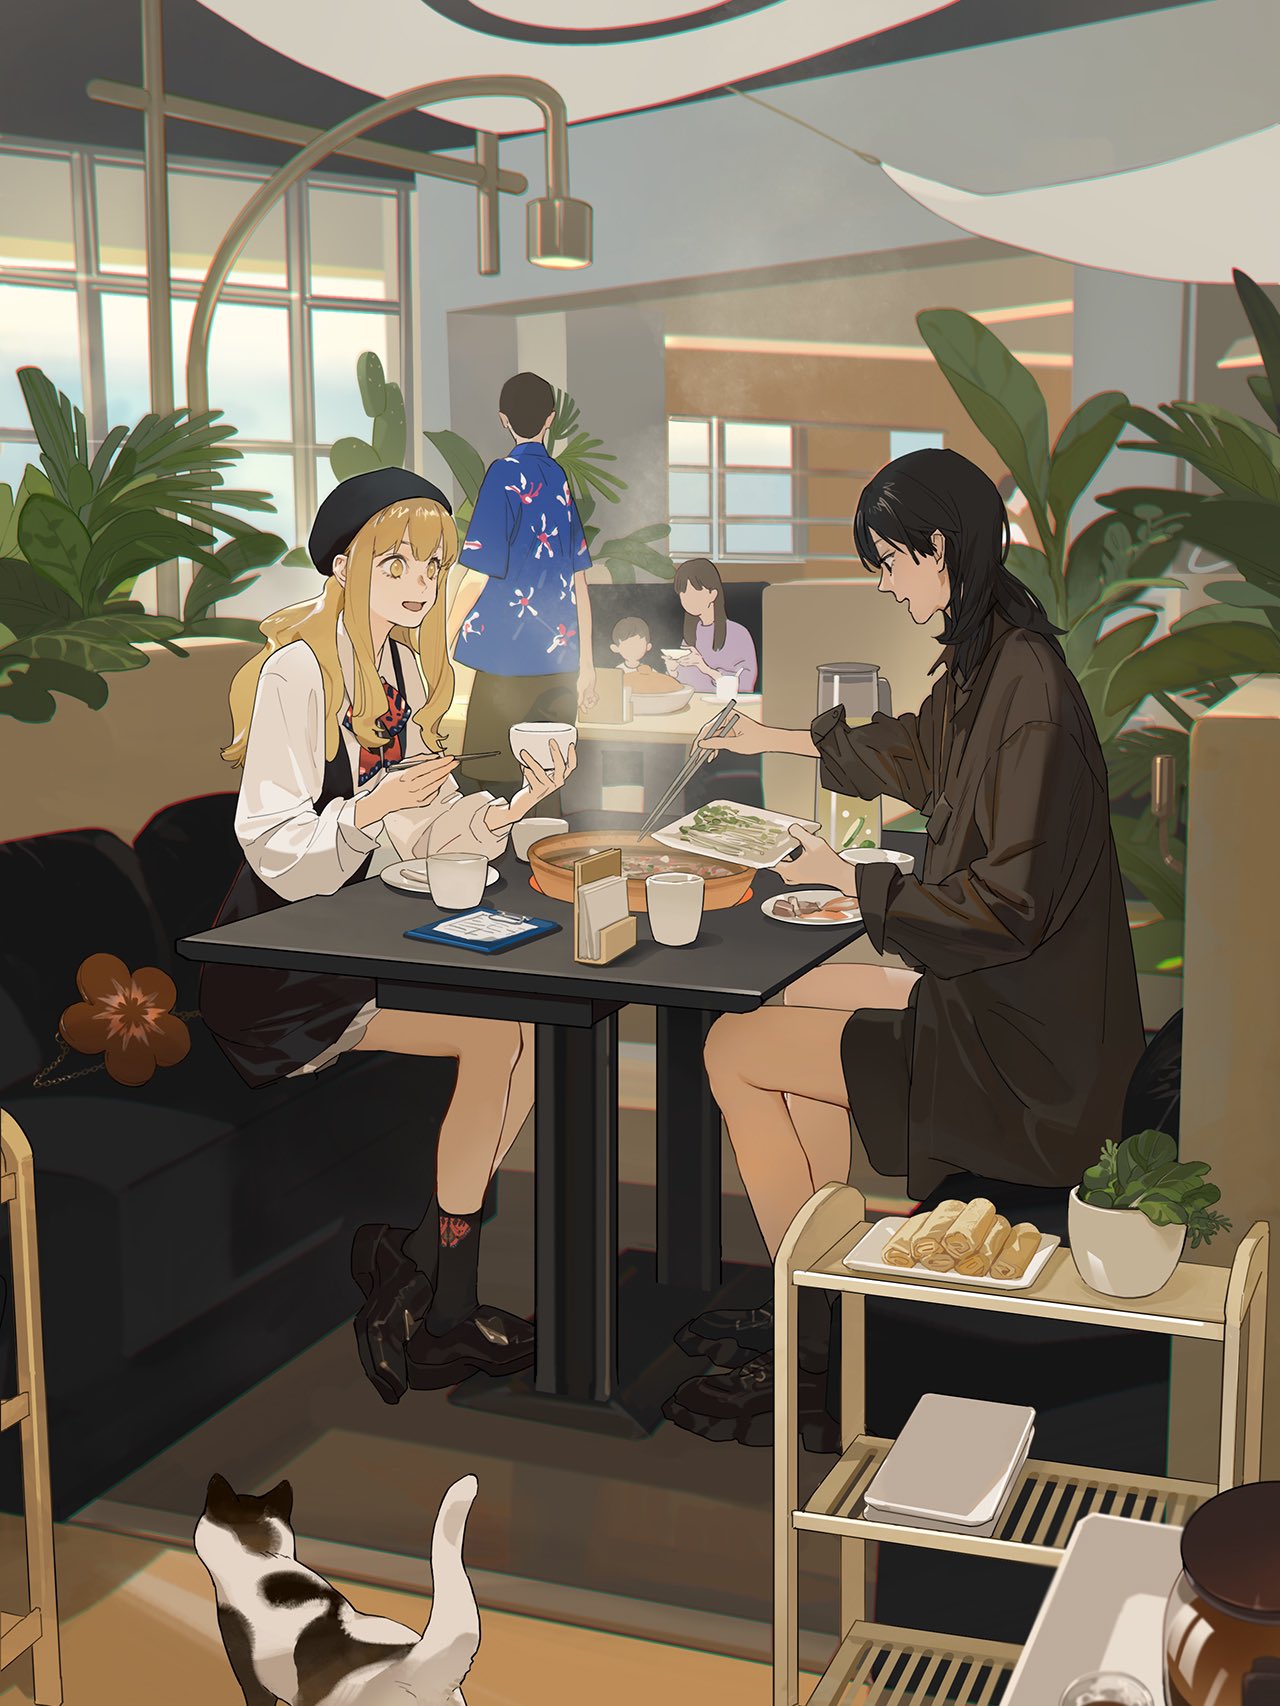 2boys 3girls black_hair blonde_hair bowl cat cooking_pot couch cup eating food highres holding holding_bowl meat multiple_boys multiple_girls on_couch plate qiu_tong restaurant spring_roll sq_(series) sun_jing tanjiu tray vegetable